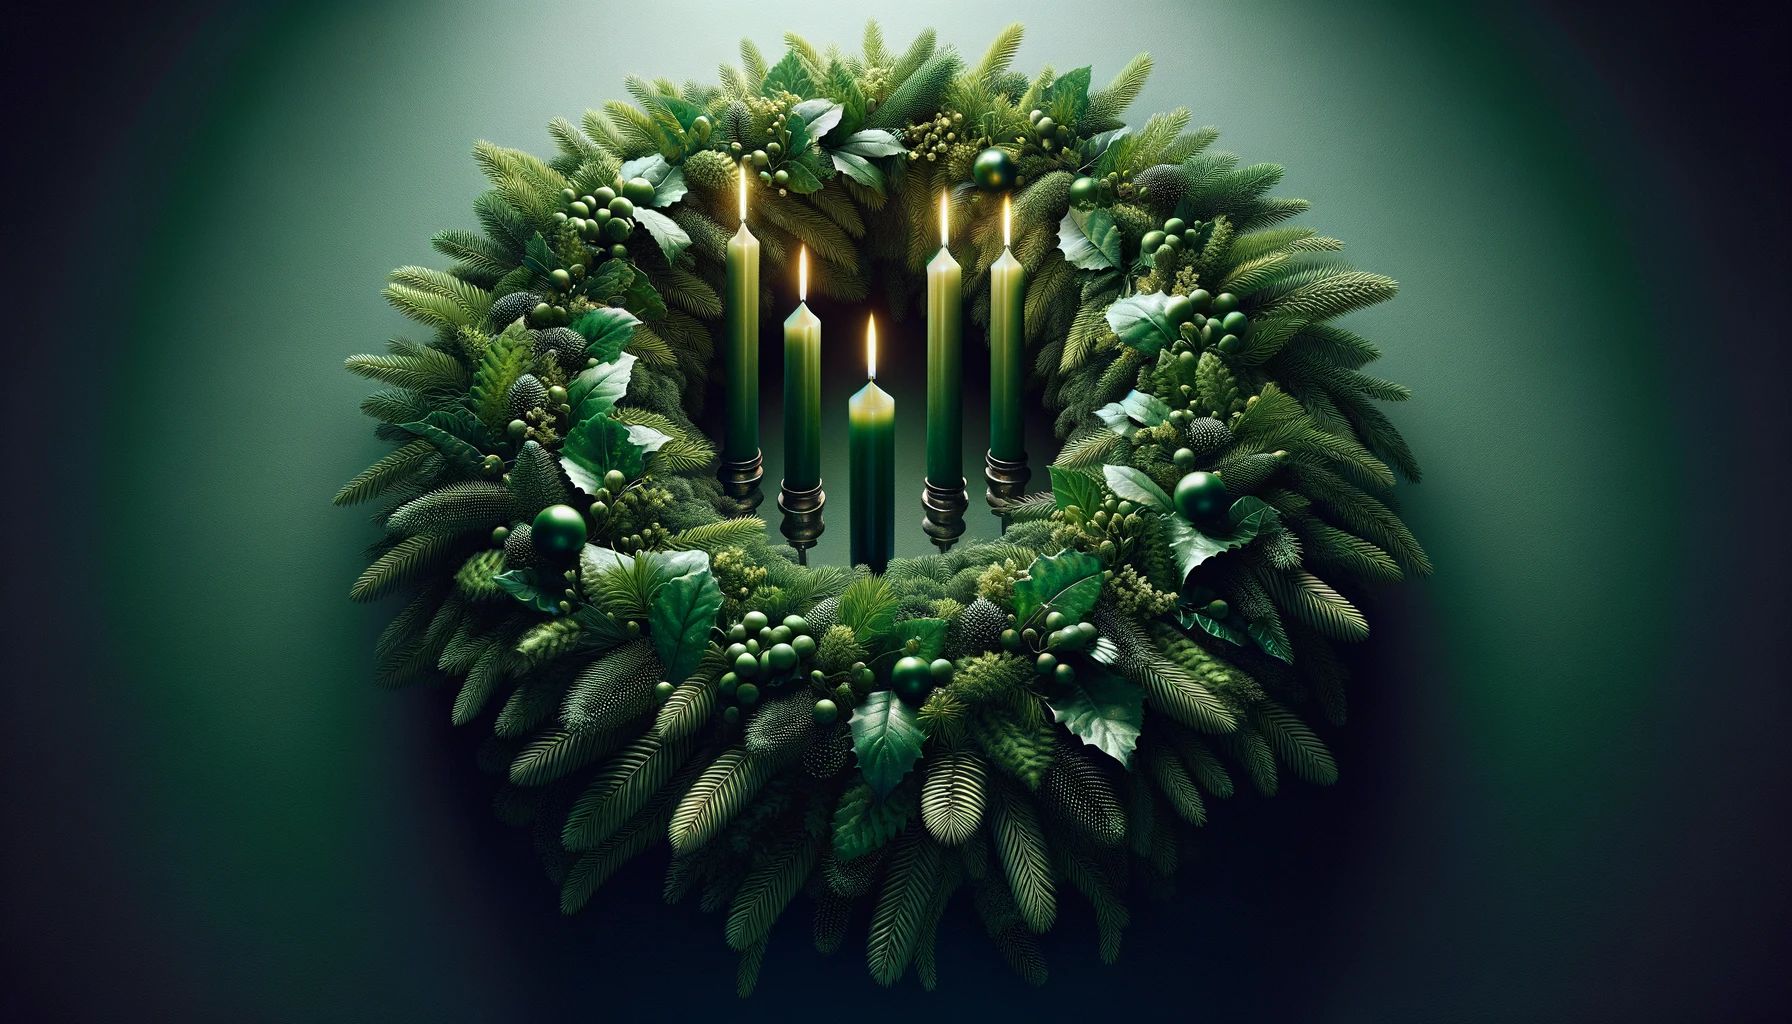 Why Is The Advent Wreath Green